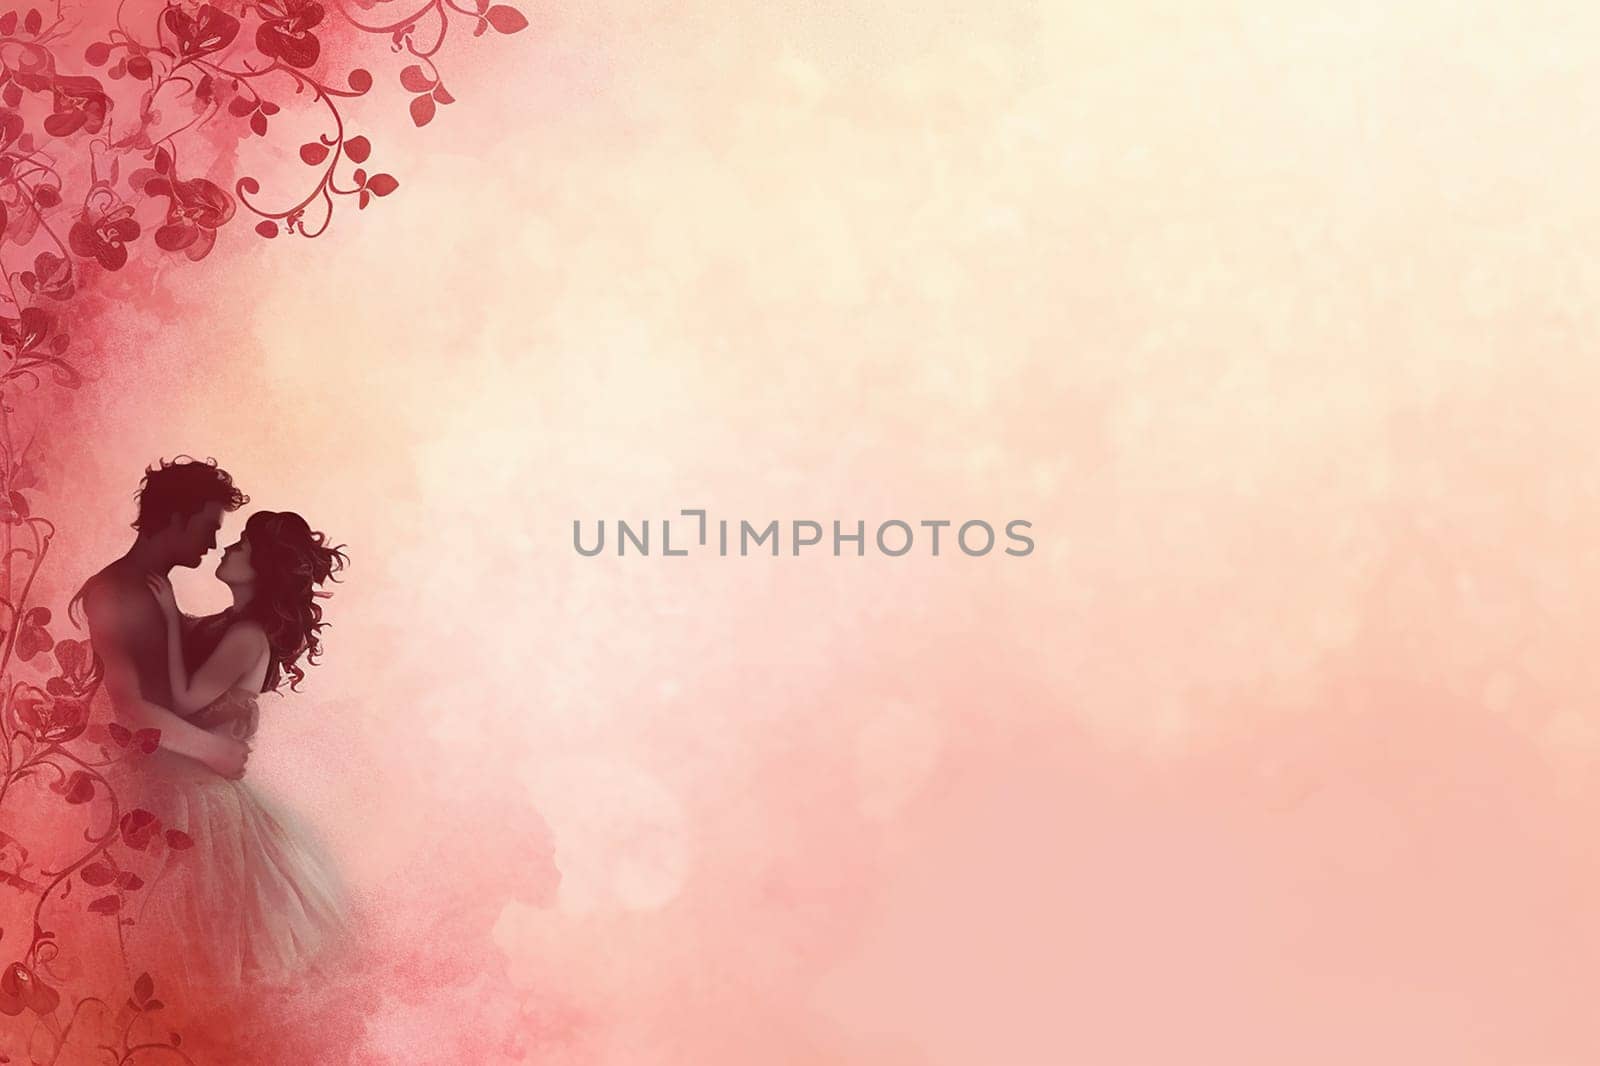 Silhouette of a couple embracing in a romantic setting with red floral accents. by Hype2art